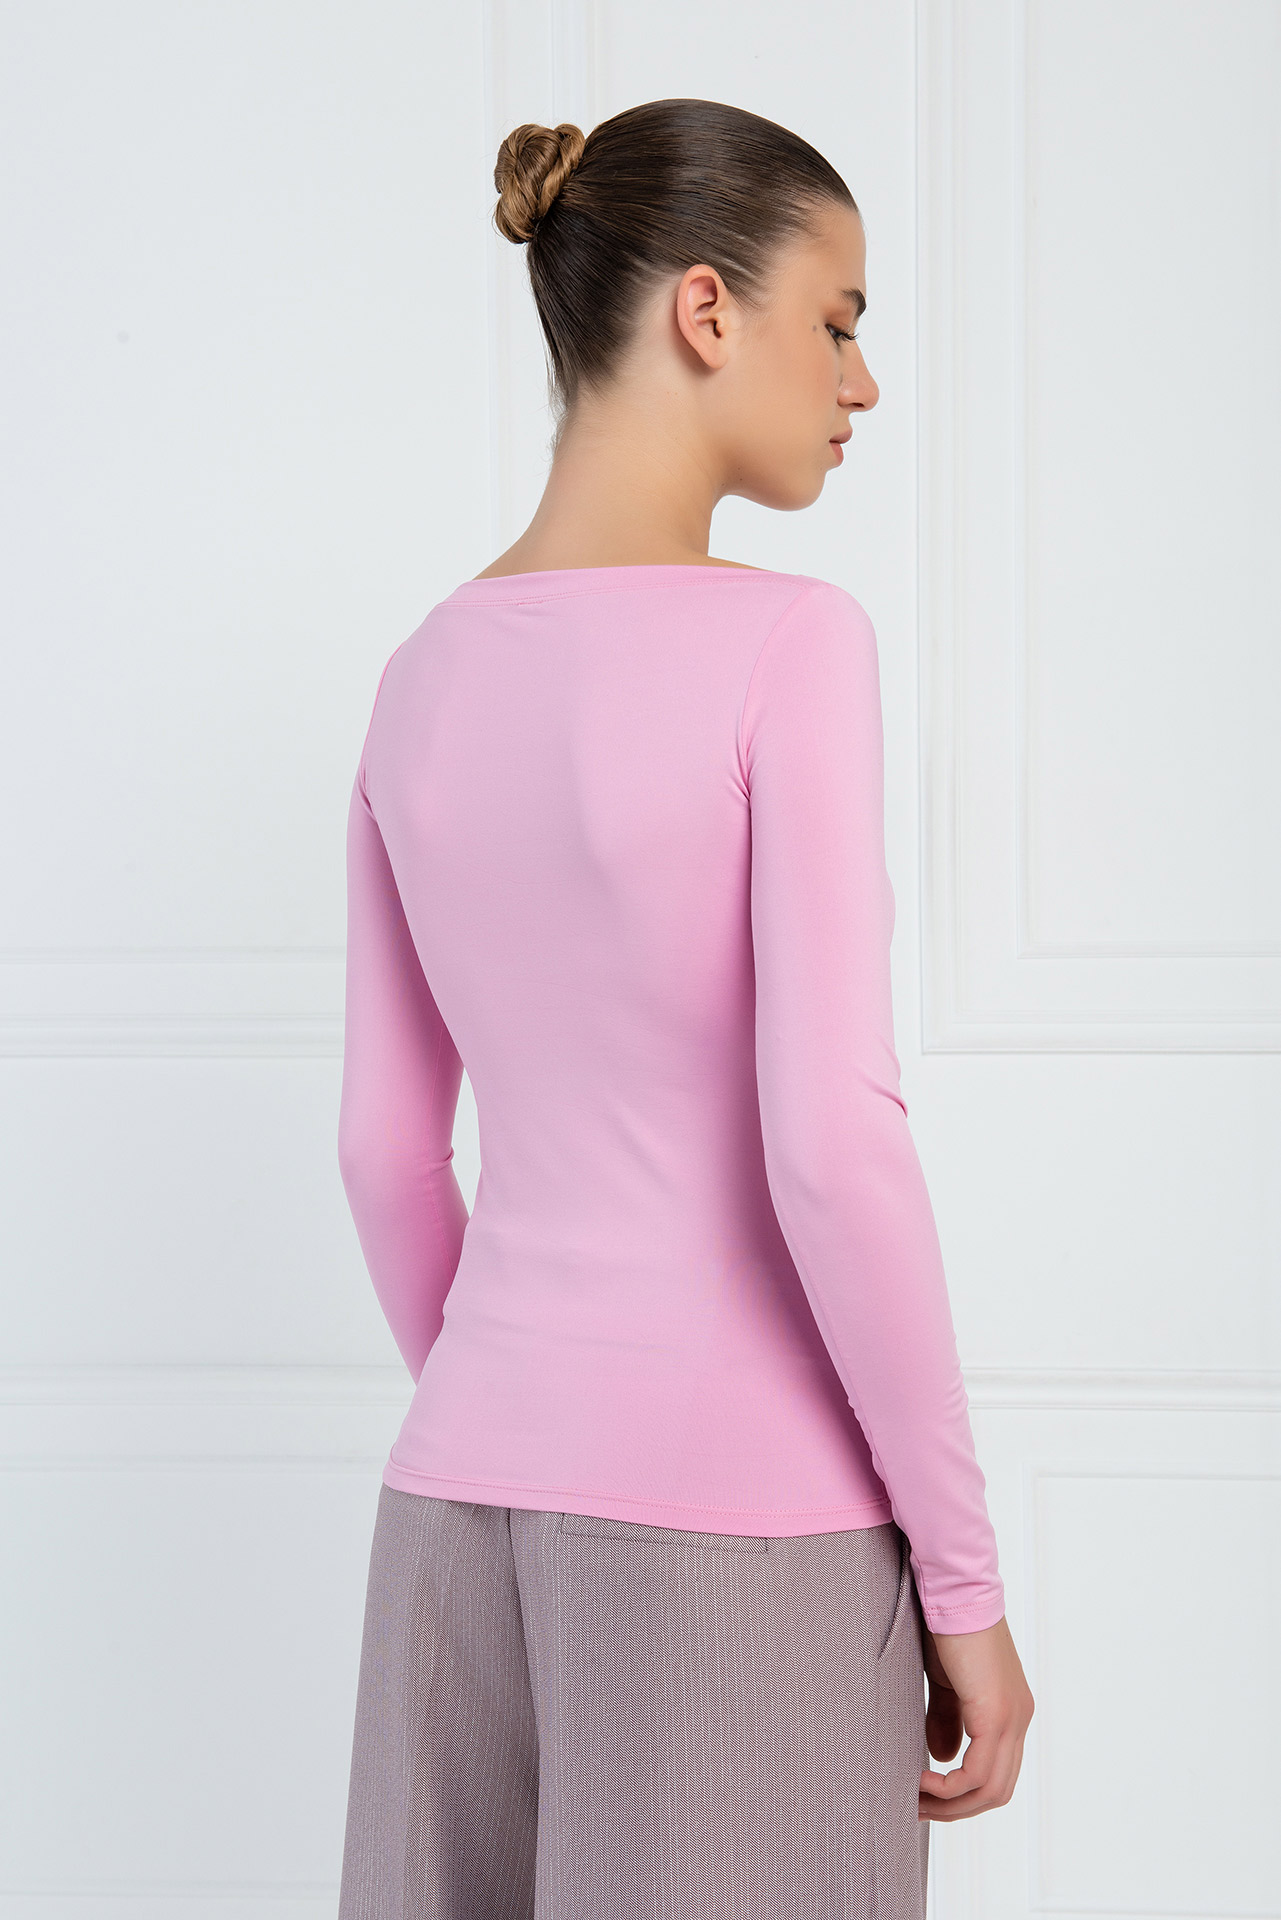 Wholesale Boat Neck Long Sleeve New Pink Top